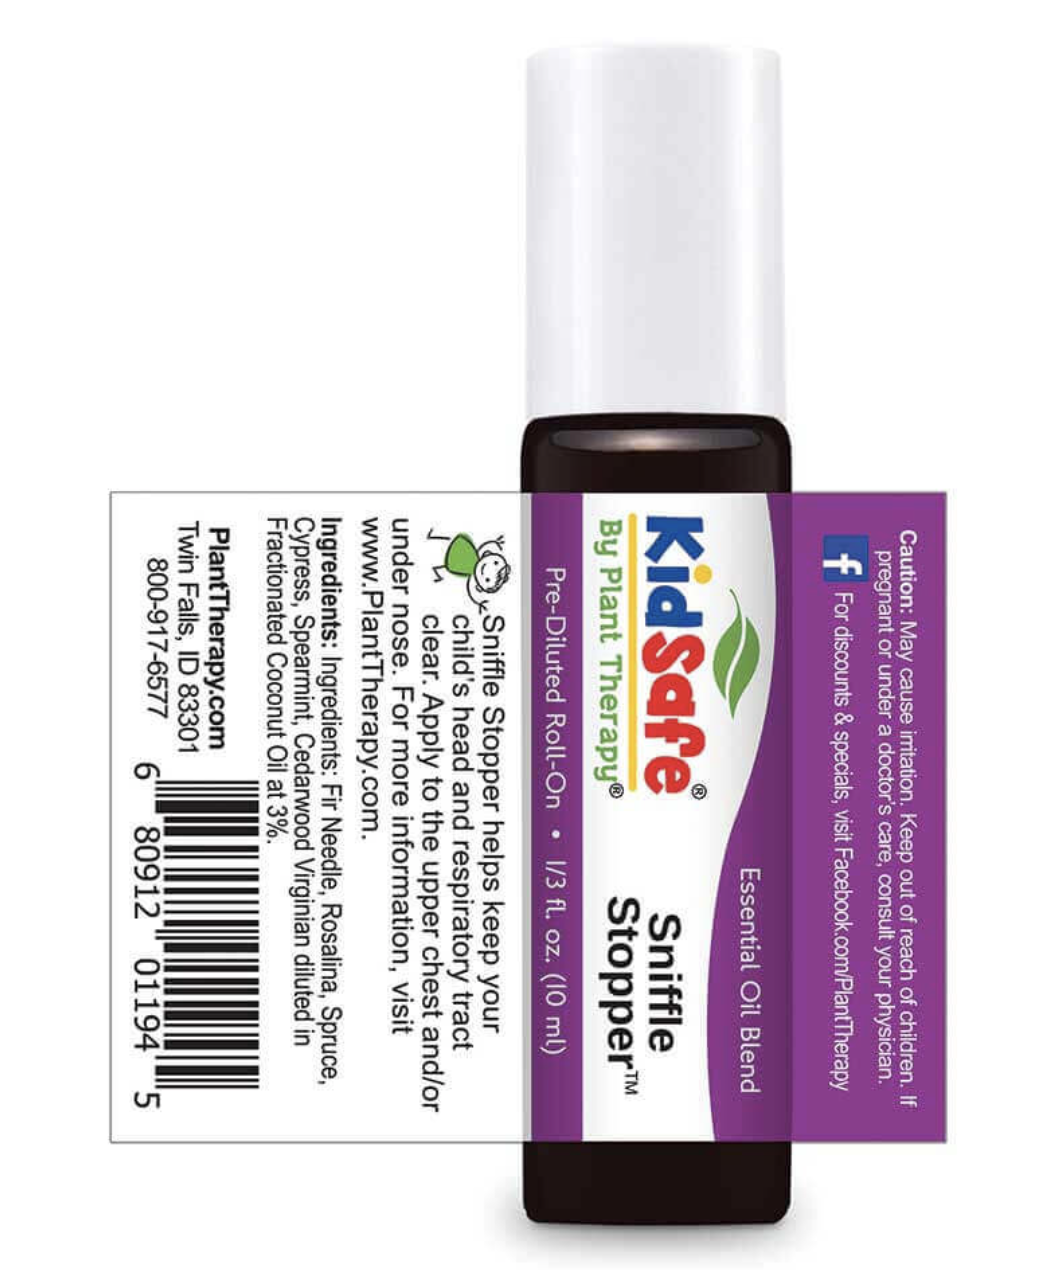 Plant Therapy Sniffle Stopper KidSafe Essential Oil Pre-Diluted Roll-On 10 ml